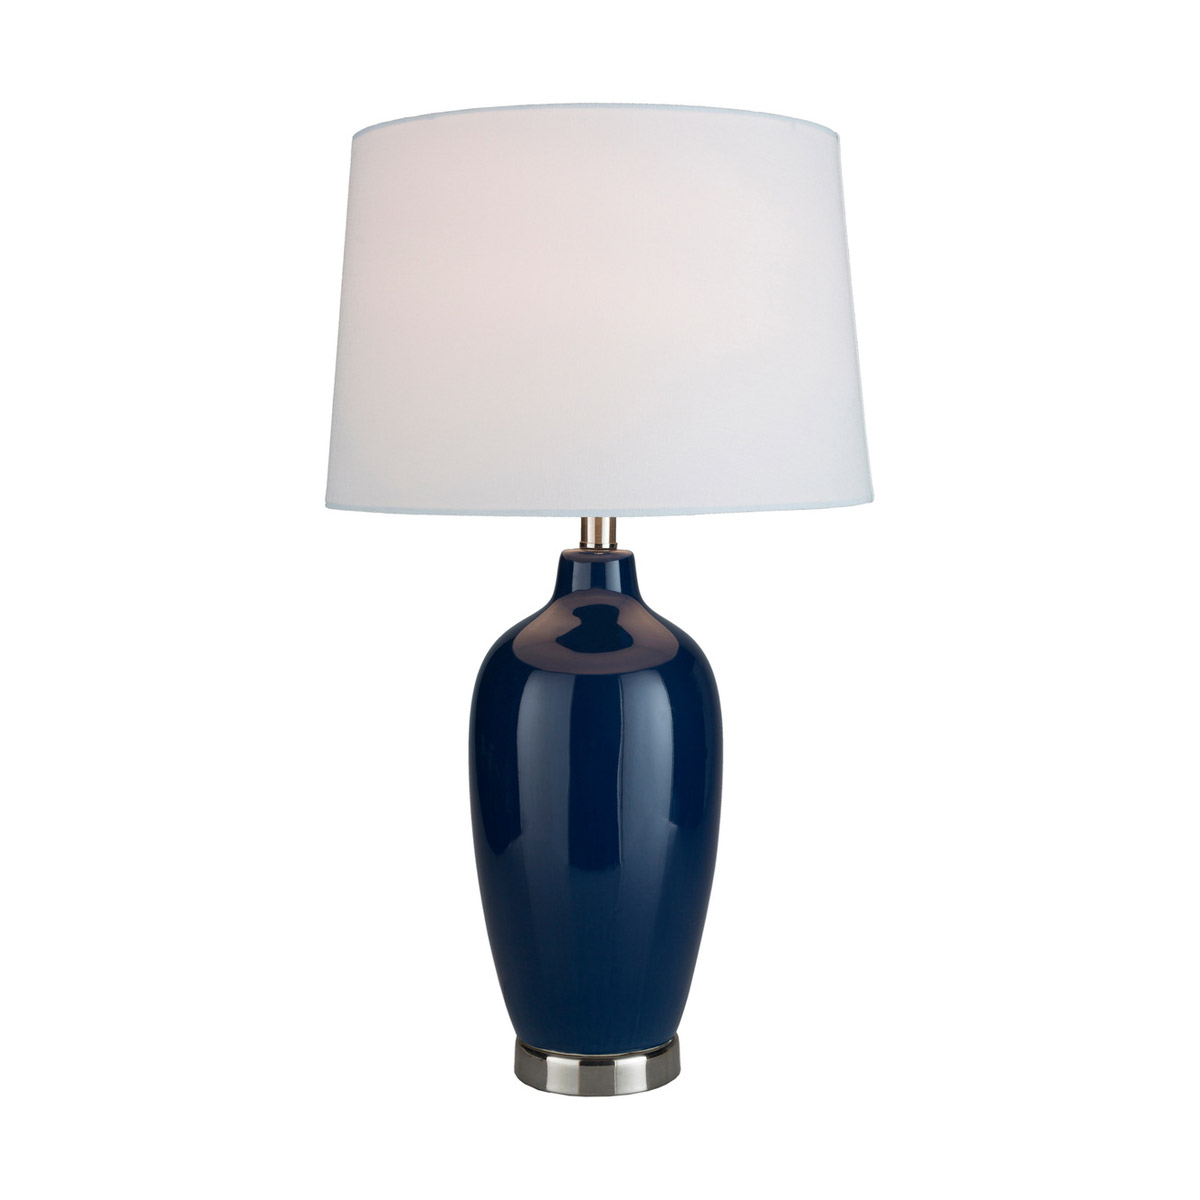 Details About Surya Lye 001 Lyle 27 Inch 100 Watt Navy Table Lamp Portable Light with dimensions 1200 X 1200